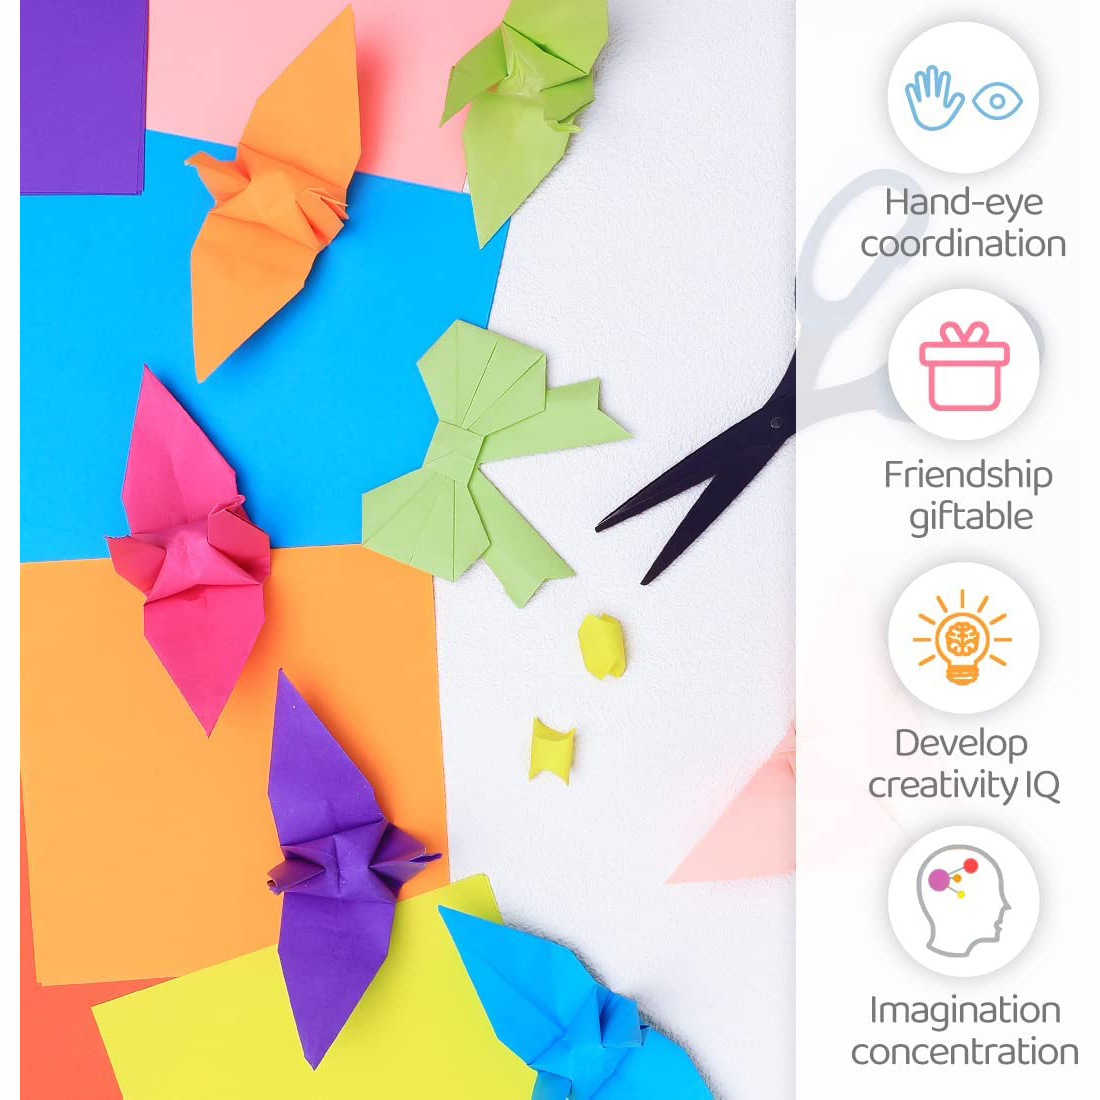 Origami Paper Double Sided Color - 200 Sheets - 20 Colors - 6 Inch Square  Easy Fold Paper for Beginner